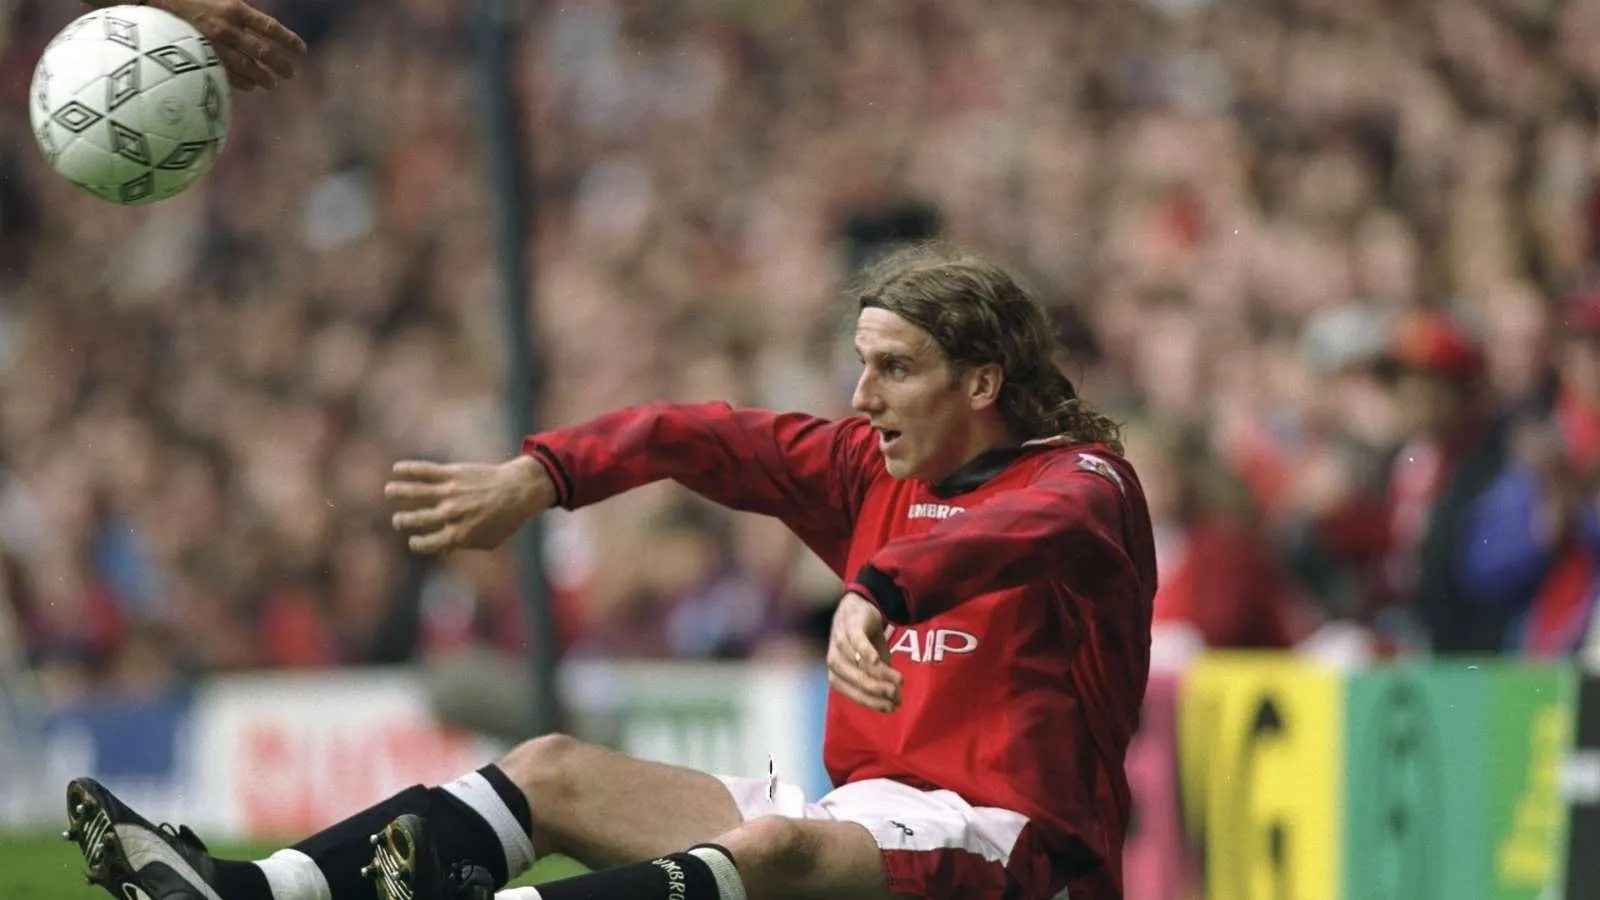 'Beckham impossible to oust from Man Utd team' as Euro 96 icon Poborsky reflects on Old Trafford career - Bóng Đá